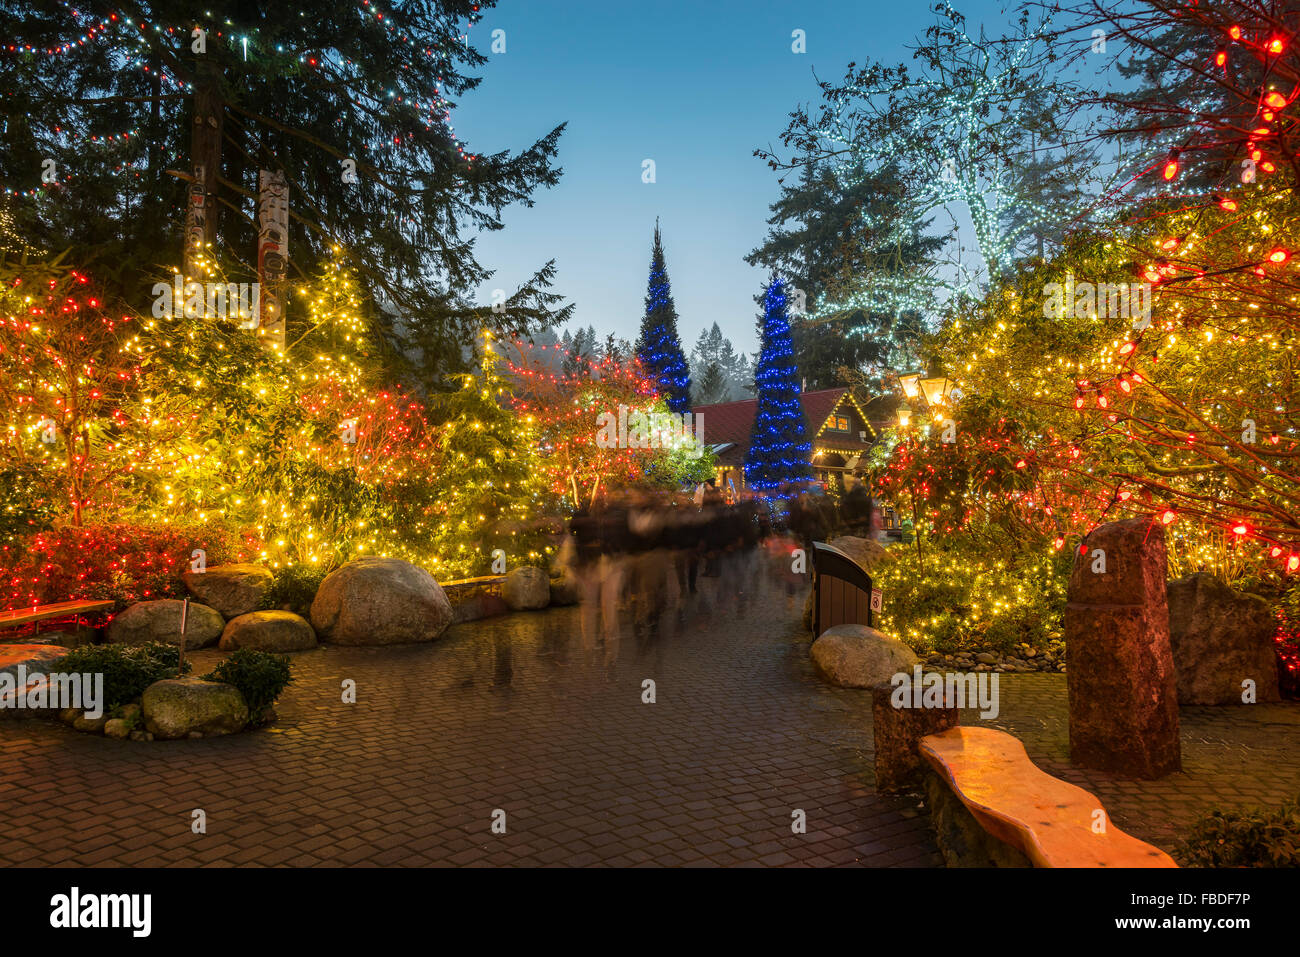 Main entrance of Capilano Suspension Bridge Park decorated with Christmas lights, Vancouver, British Columbia, Canada Stock Photo